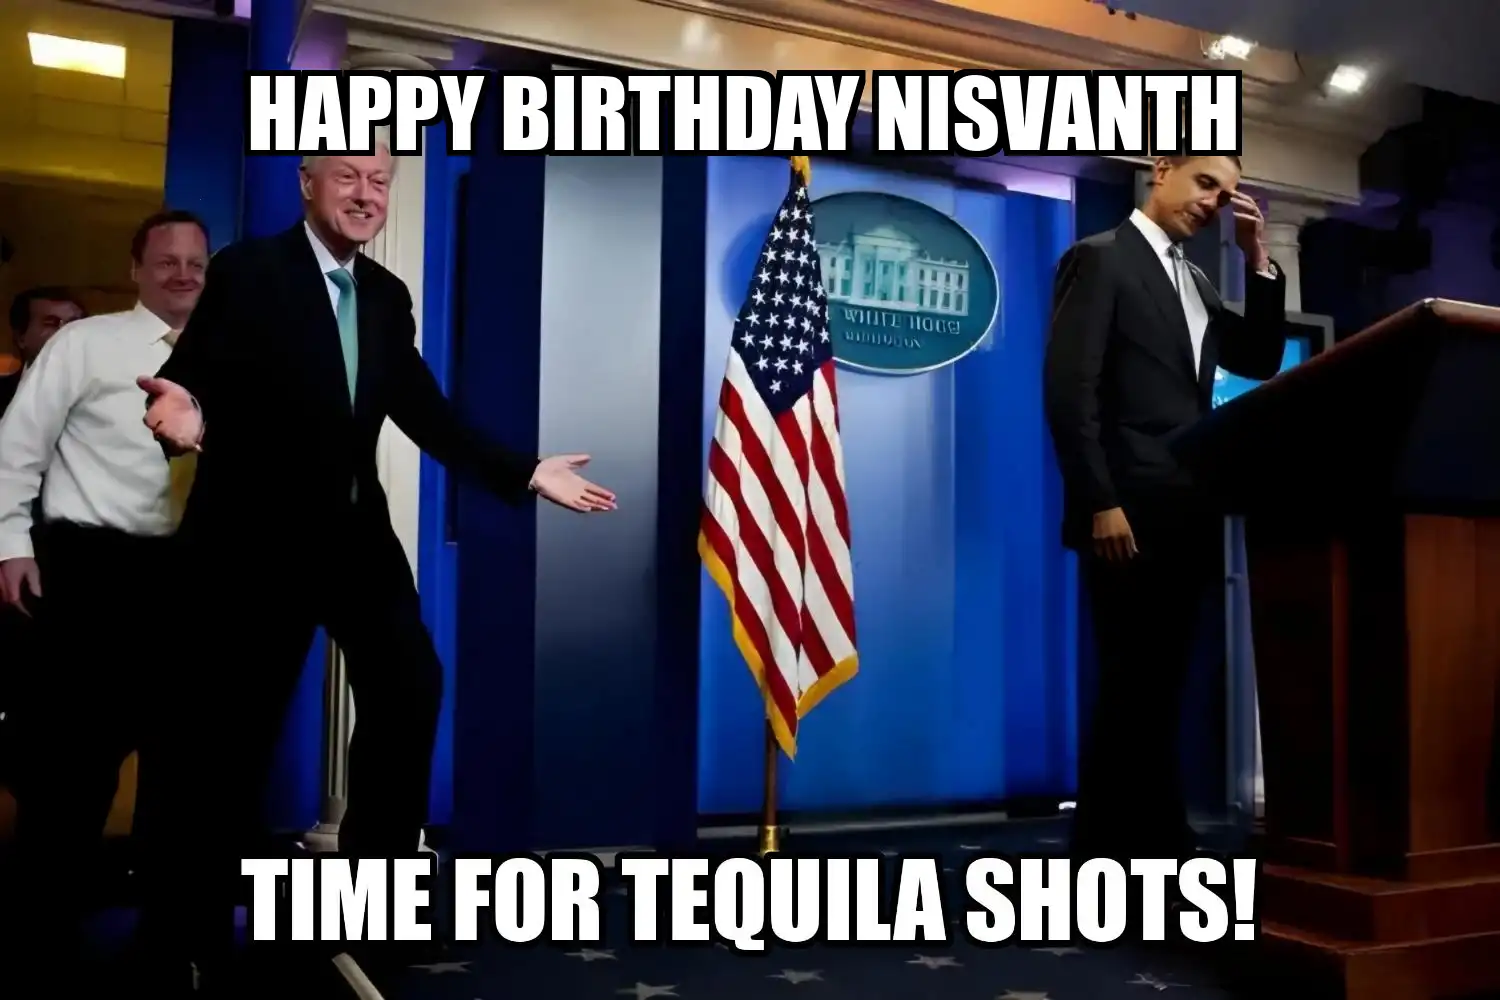 Happy Birthday Nisvanth Time For Tequila Shots Memes